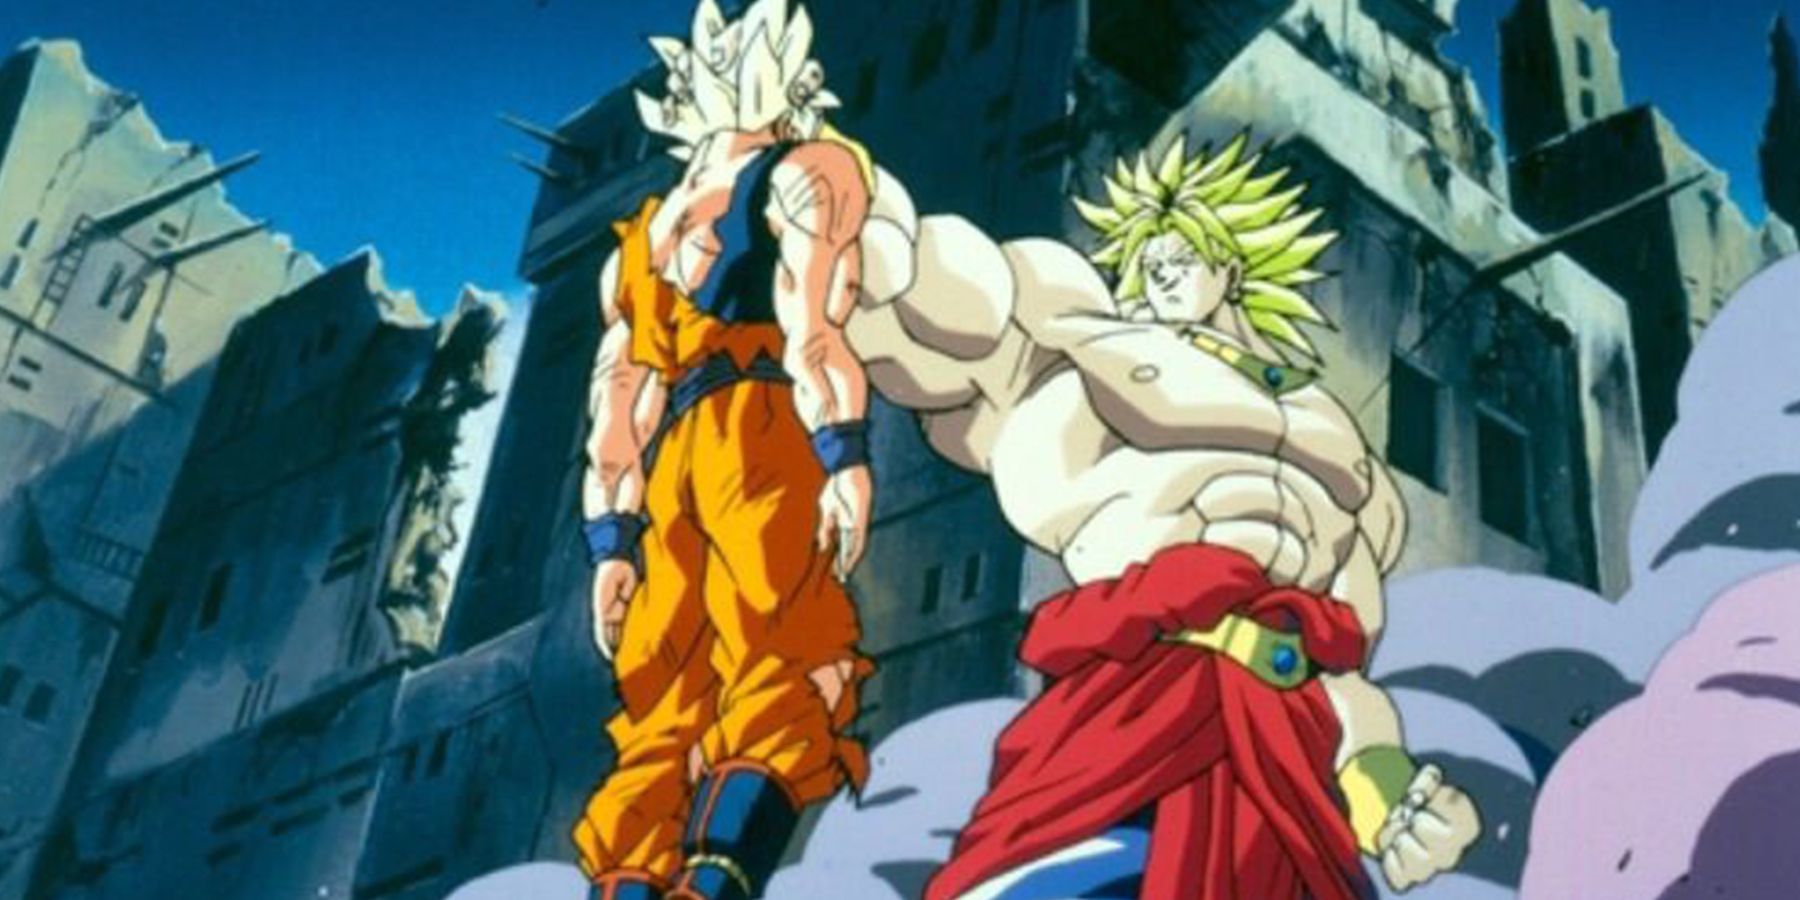 dragon ball z broly the legendary super saiyan movie coming to theater were?